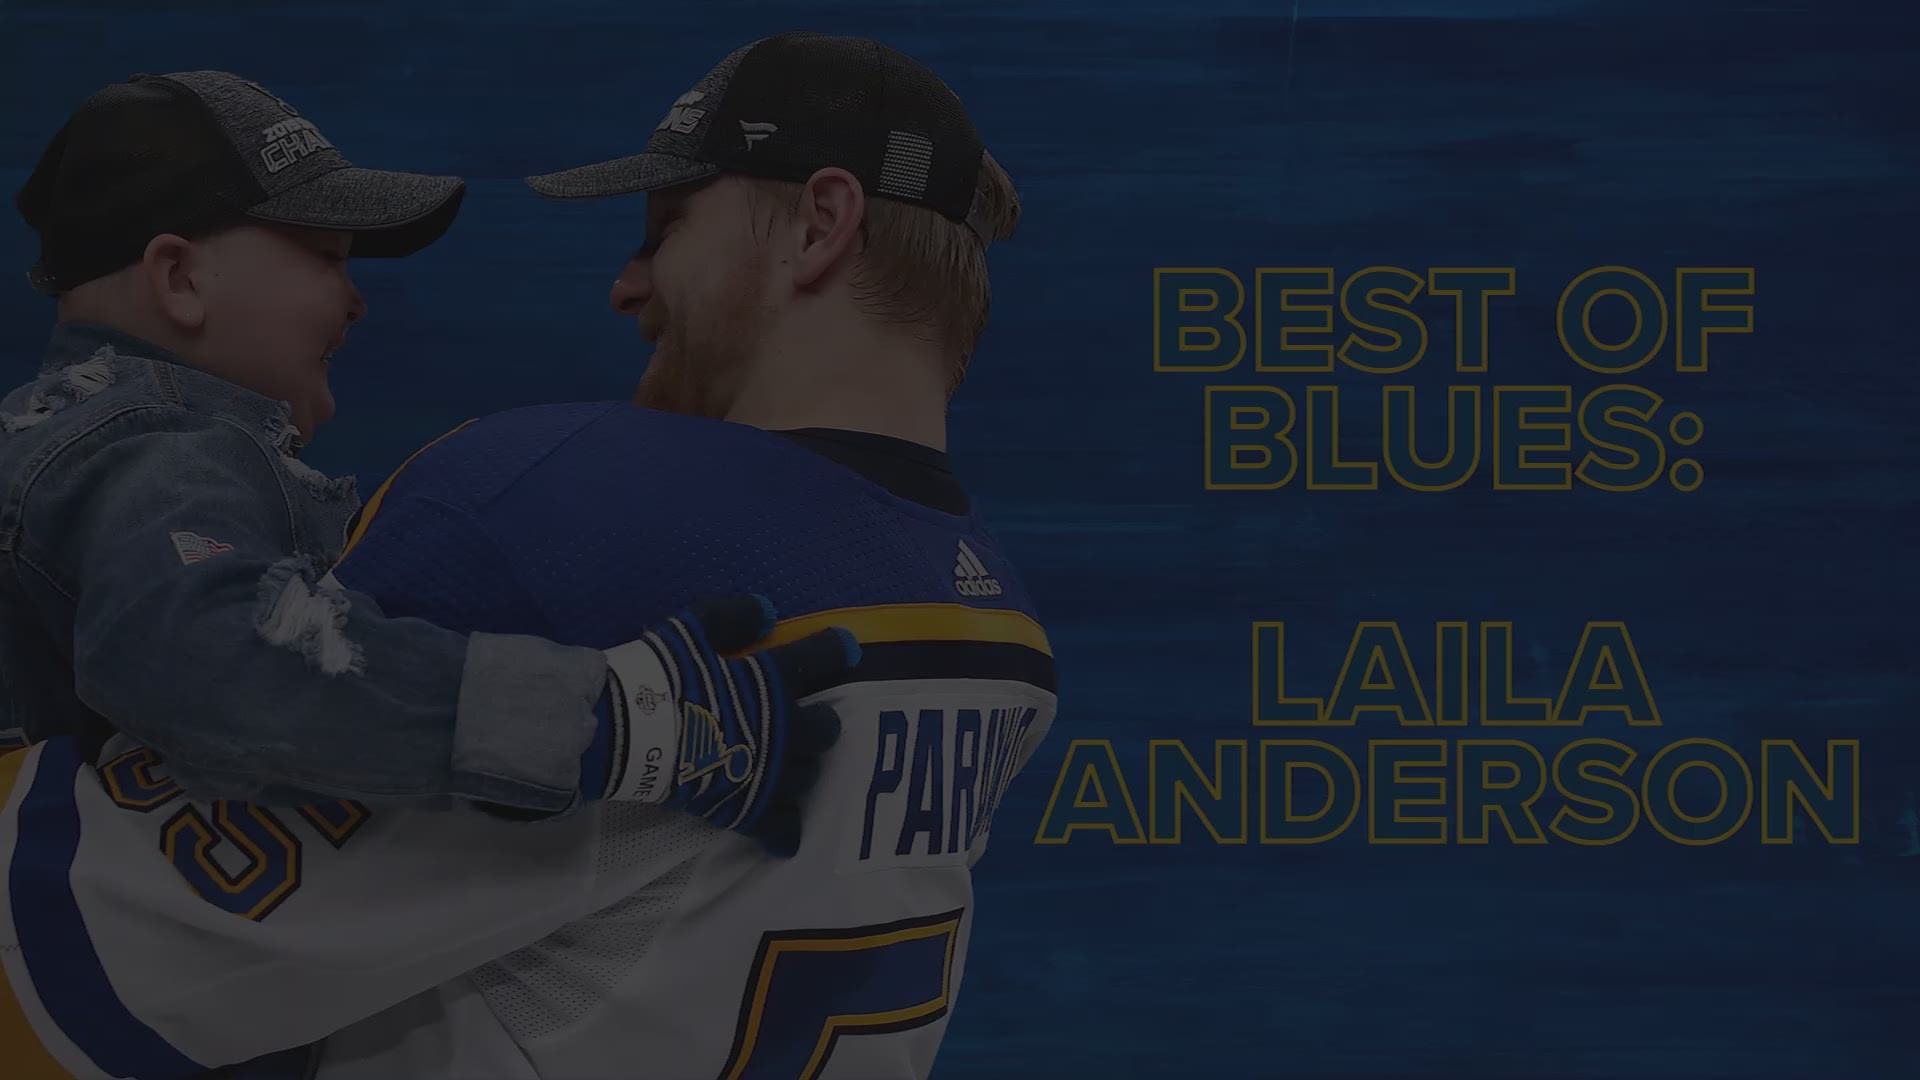 Laila Anderson stole our hearts as the Blues won their first Stanley Cup. Here's her story. From the beginning.